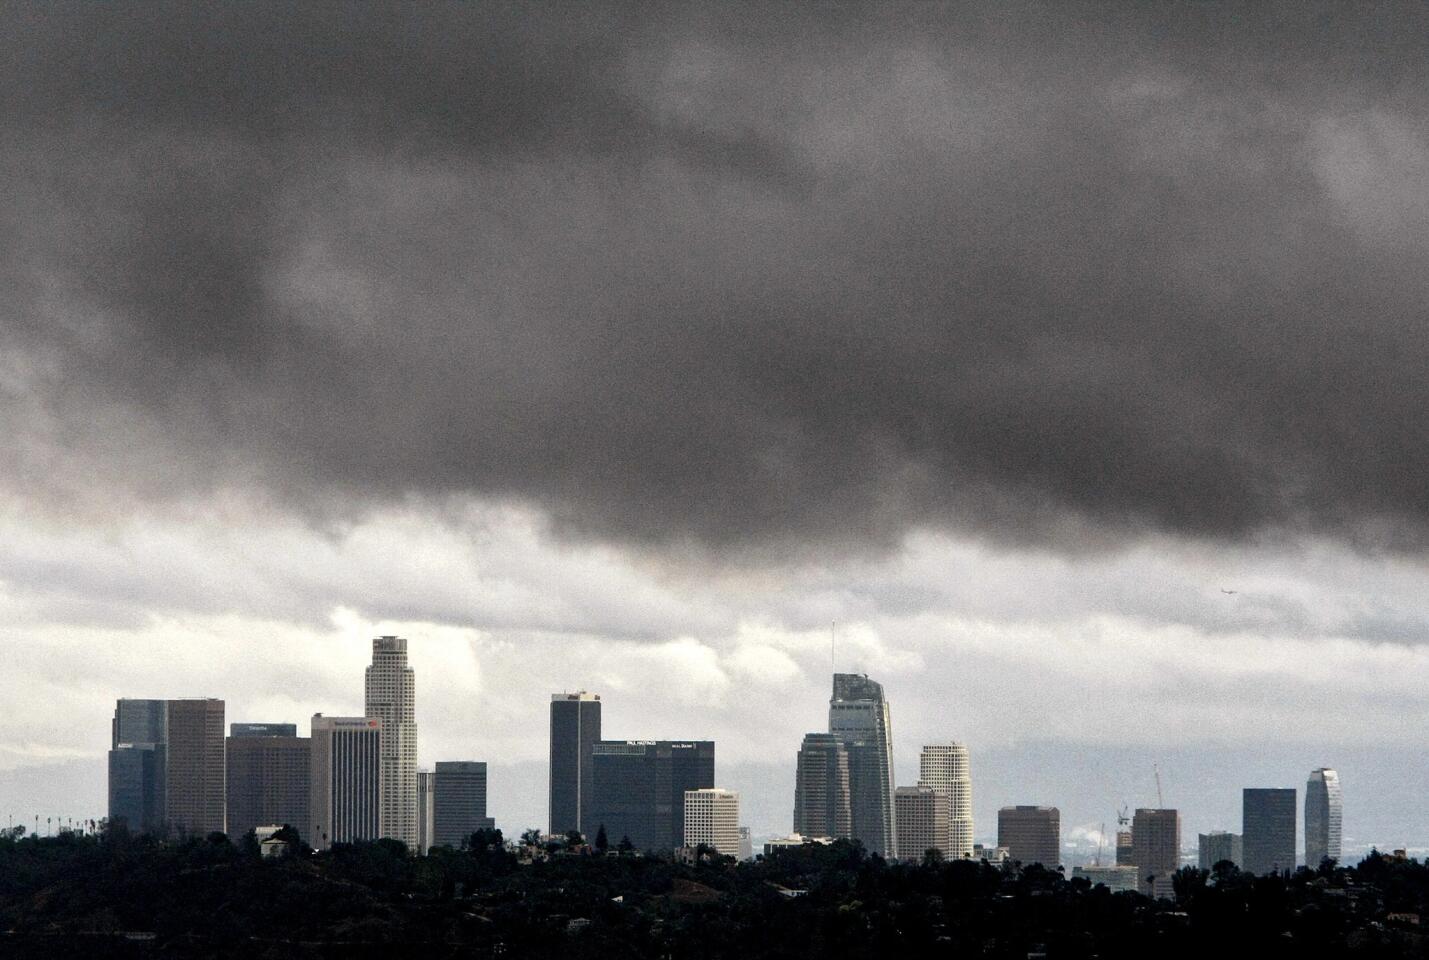 Photo Gallery: Cold storm system brought rain to the area on Saturday